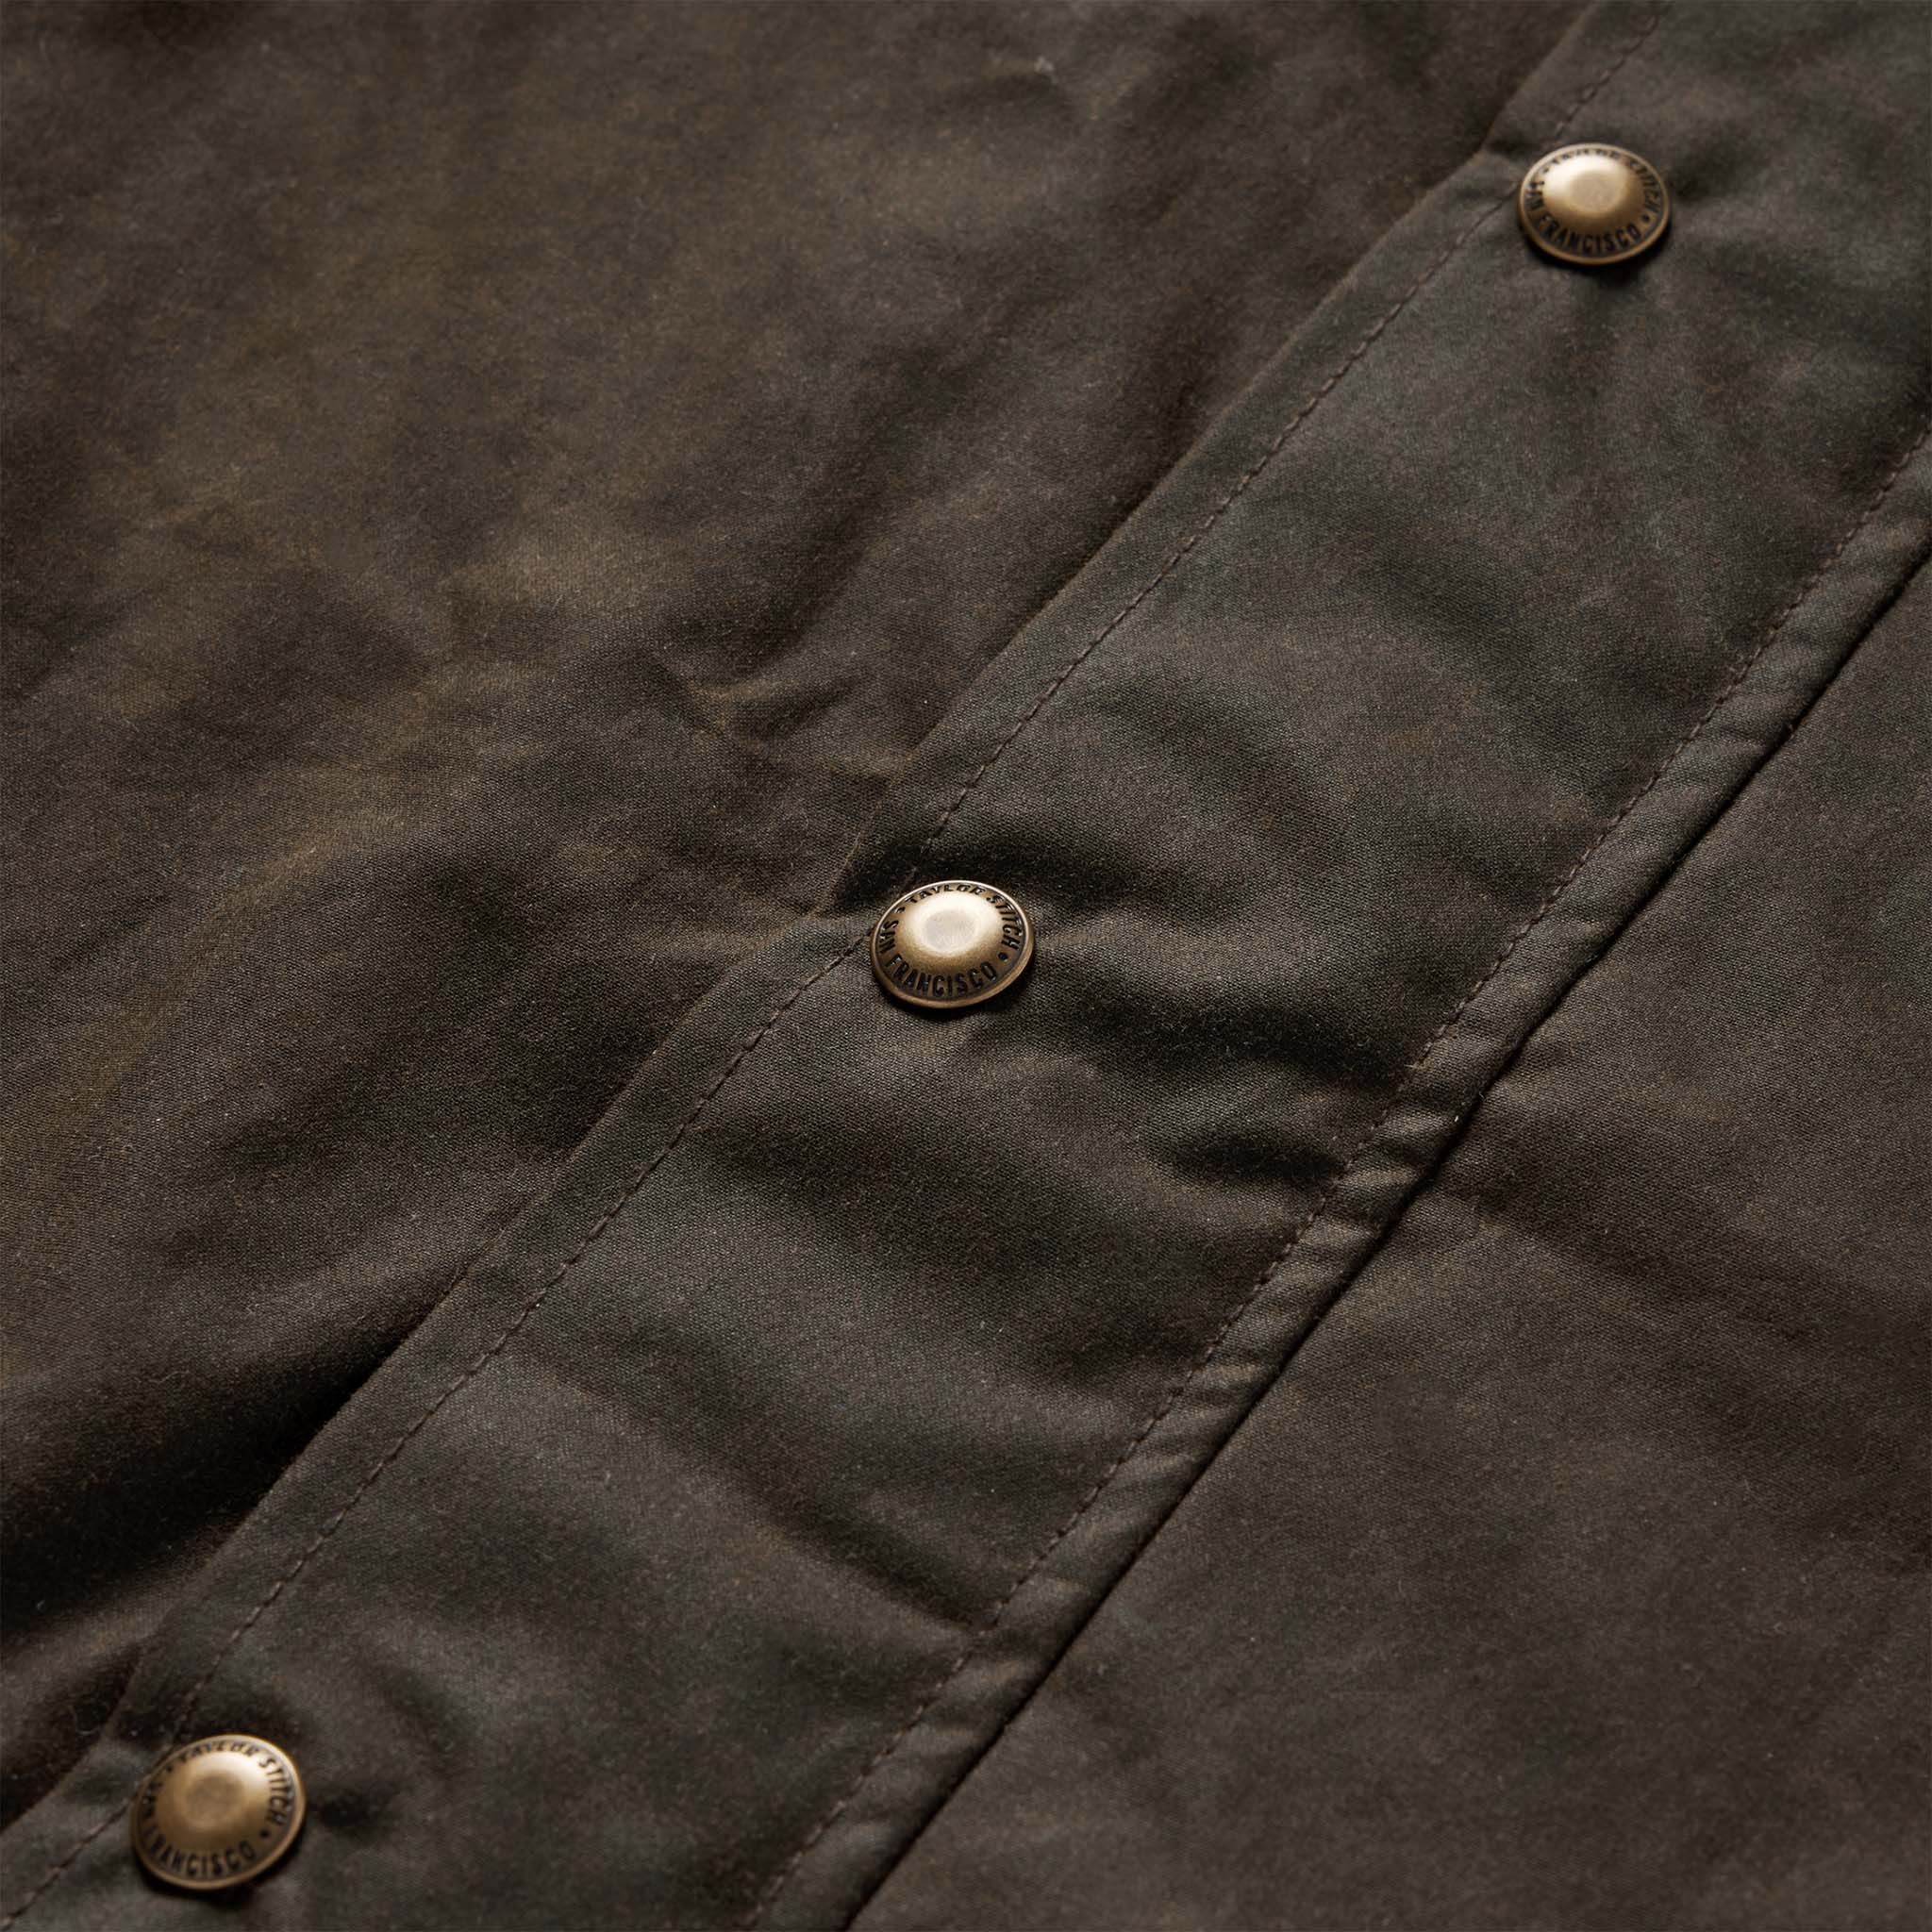 Taylor Stitch Bomber Jacket in Bark EverWax | The Coolector